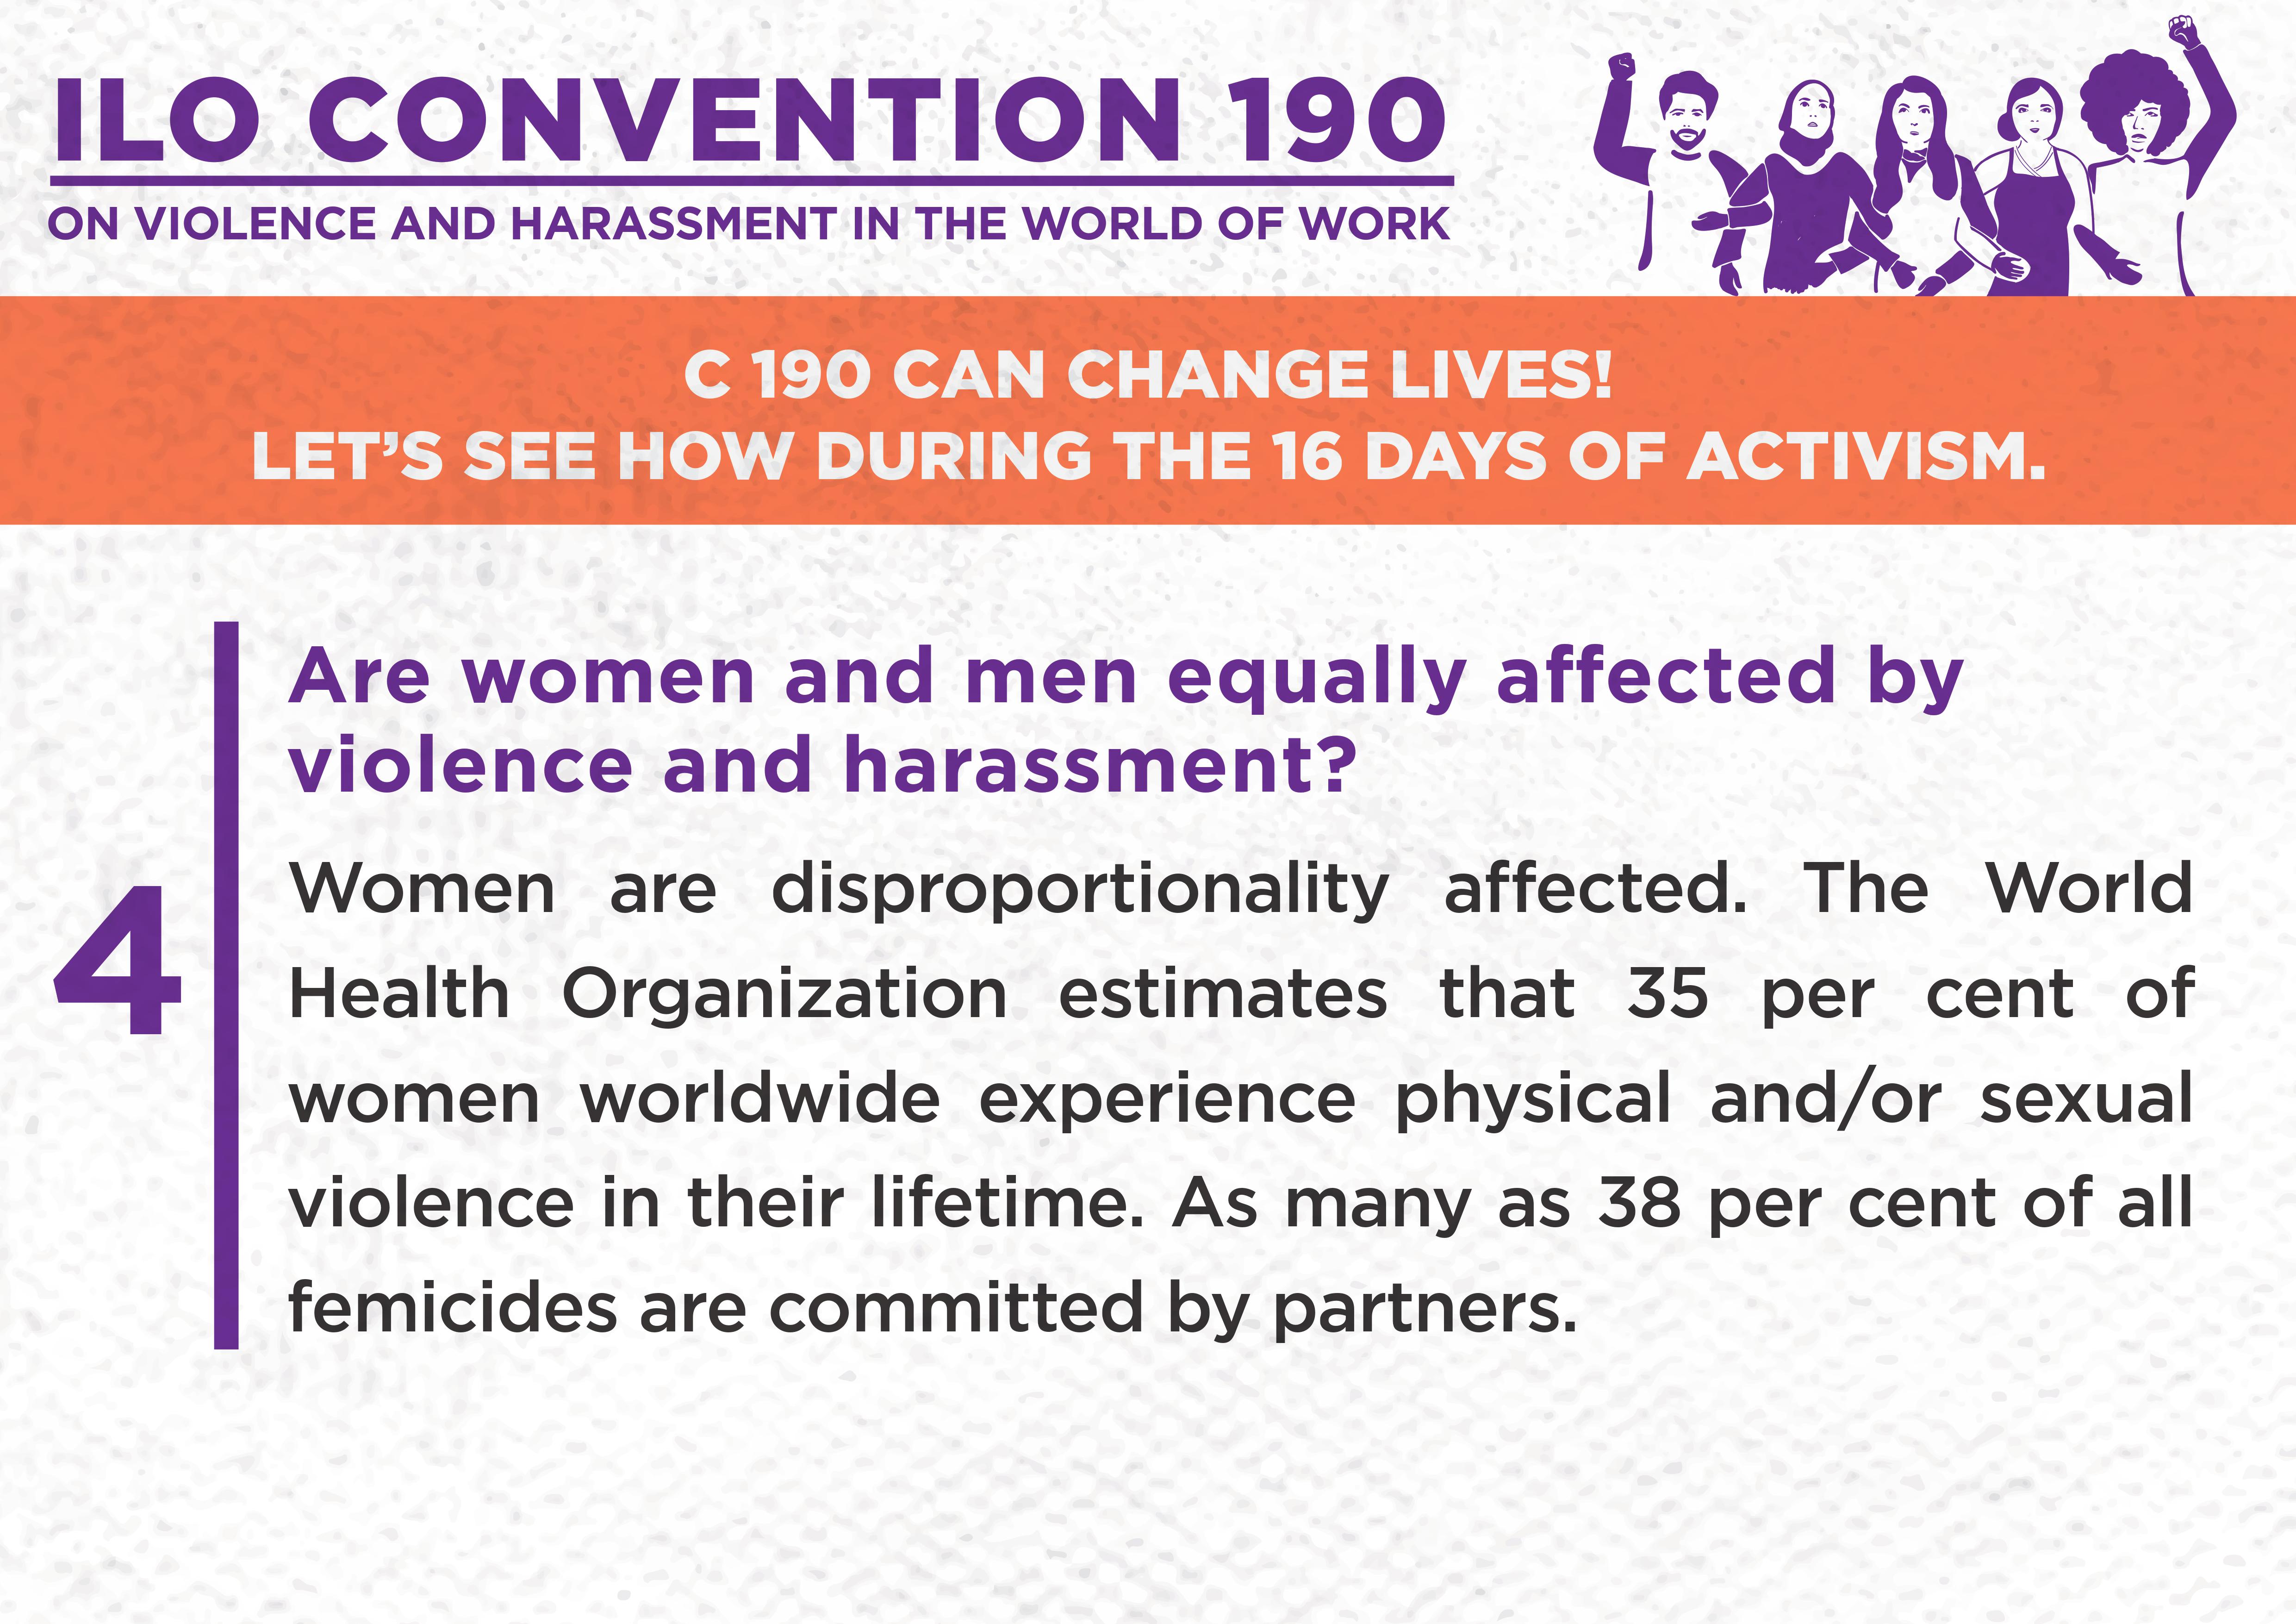 4. Are women and men equally affected by violence and harassment?